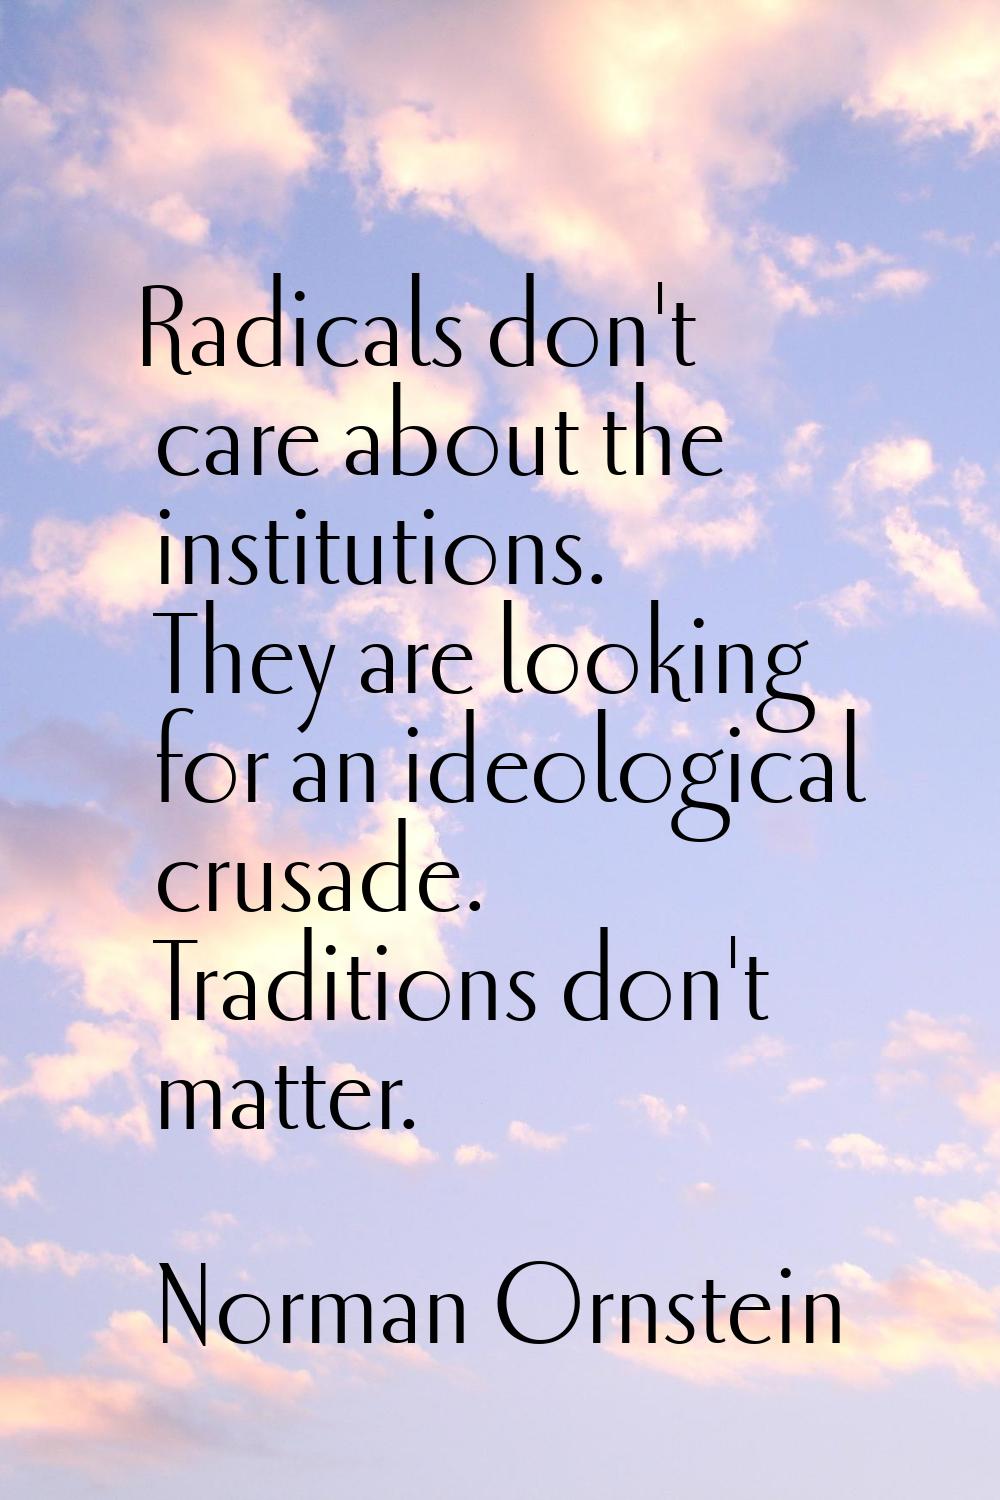 Radicals don't care about the institutions. They are looking for an ideological crusade. Traditions